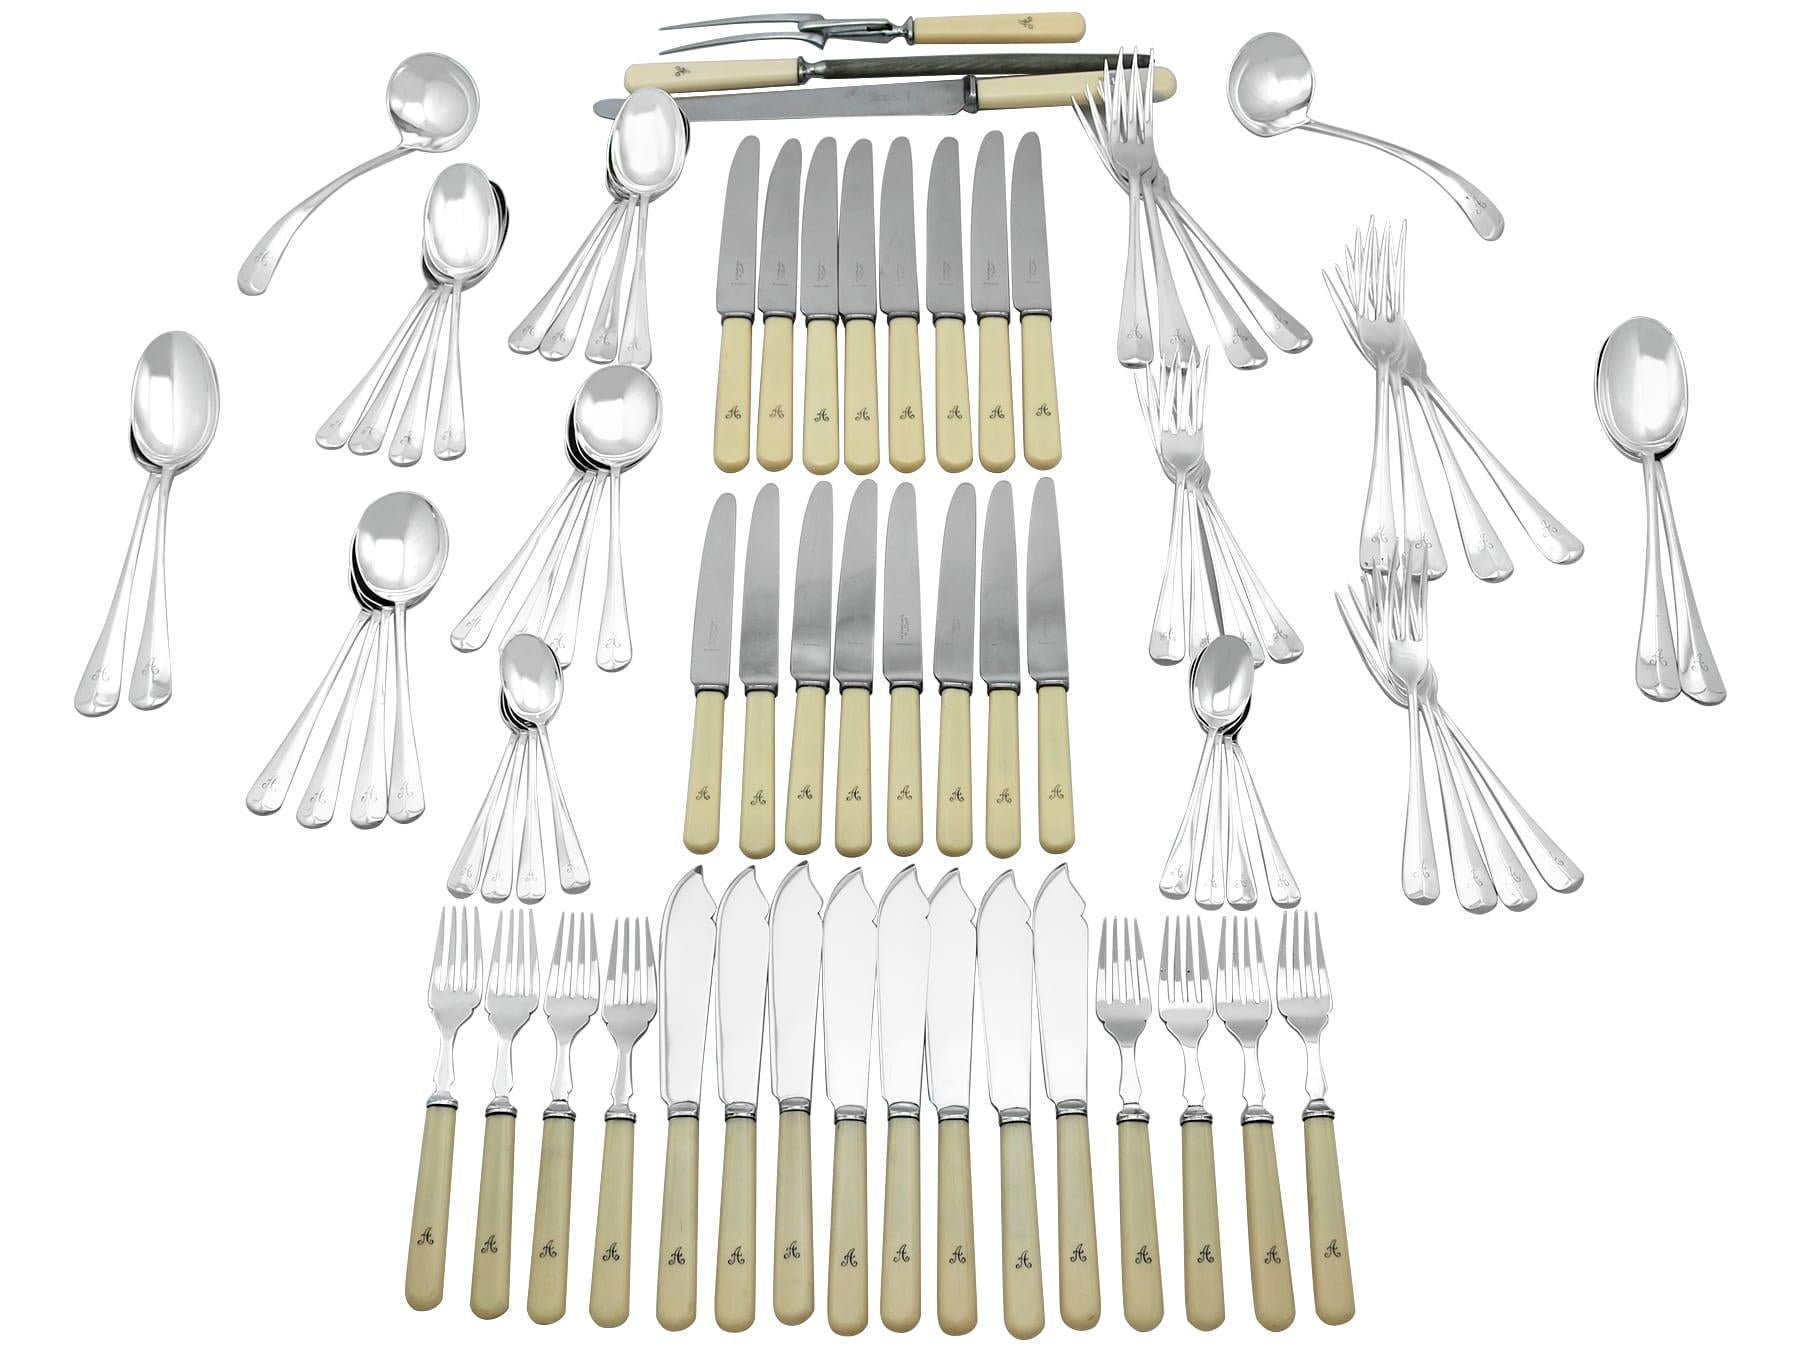 The pieces of this exceptional vintage straight* sterling silver flatware set for 8 persons have been crafted in the Hanoverian rat tail pattern.

The surface of each rounded handle is embellished with a pip to the terminal, in addition to the